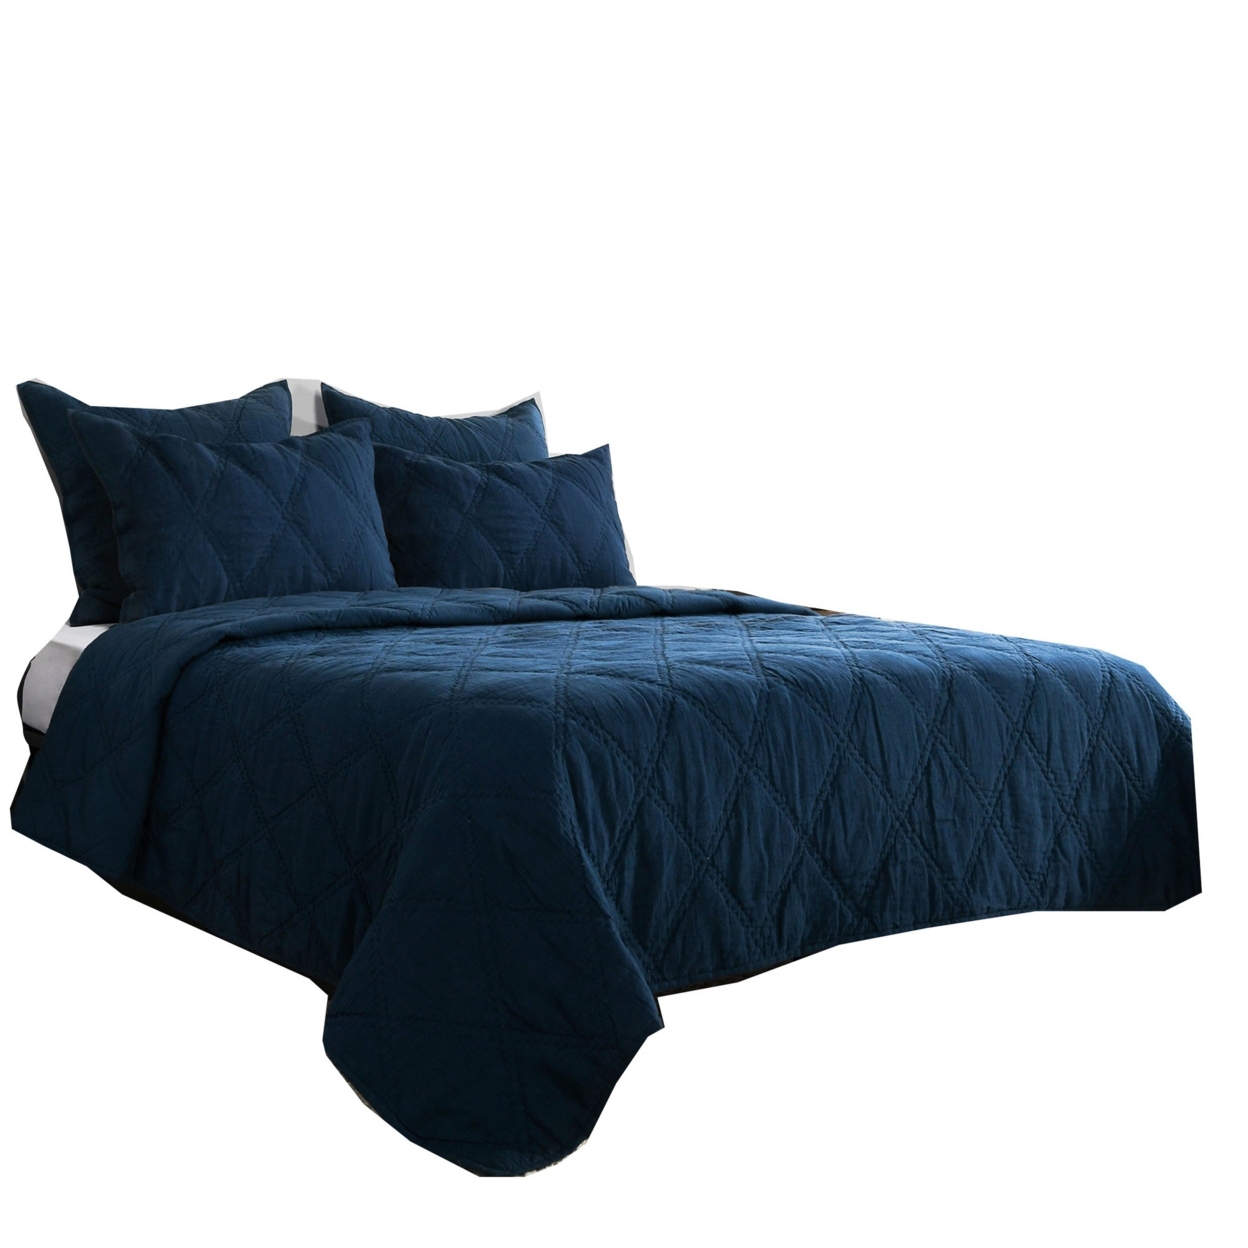 Hara Hand Quilted King Size Flax Linen Quilt With Polyester Fill, Dark Blue- Saltoro Sherpi